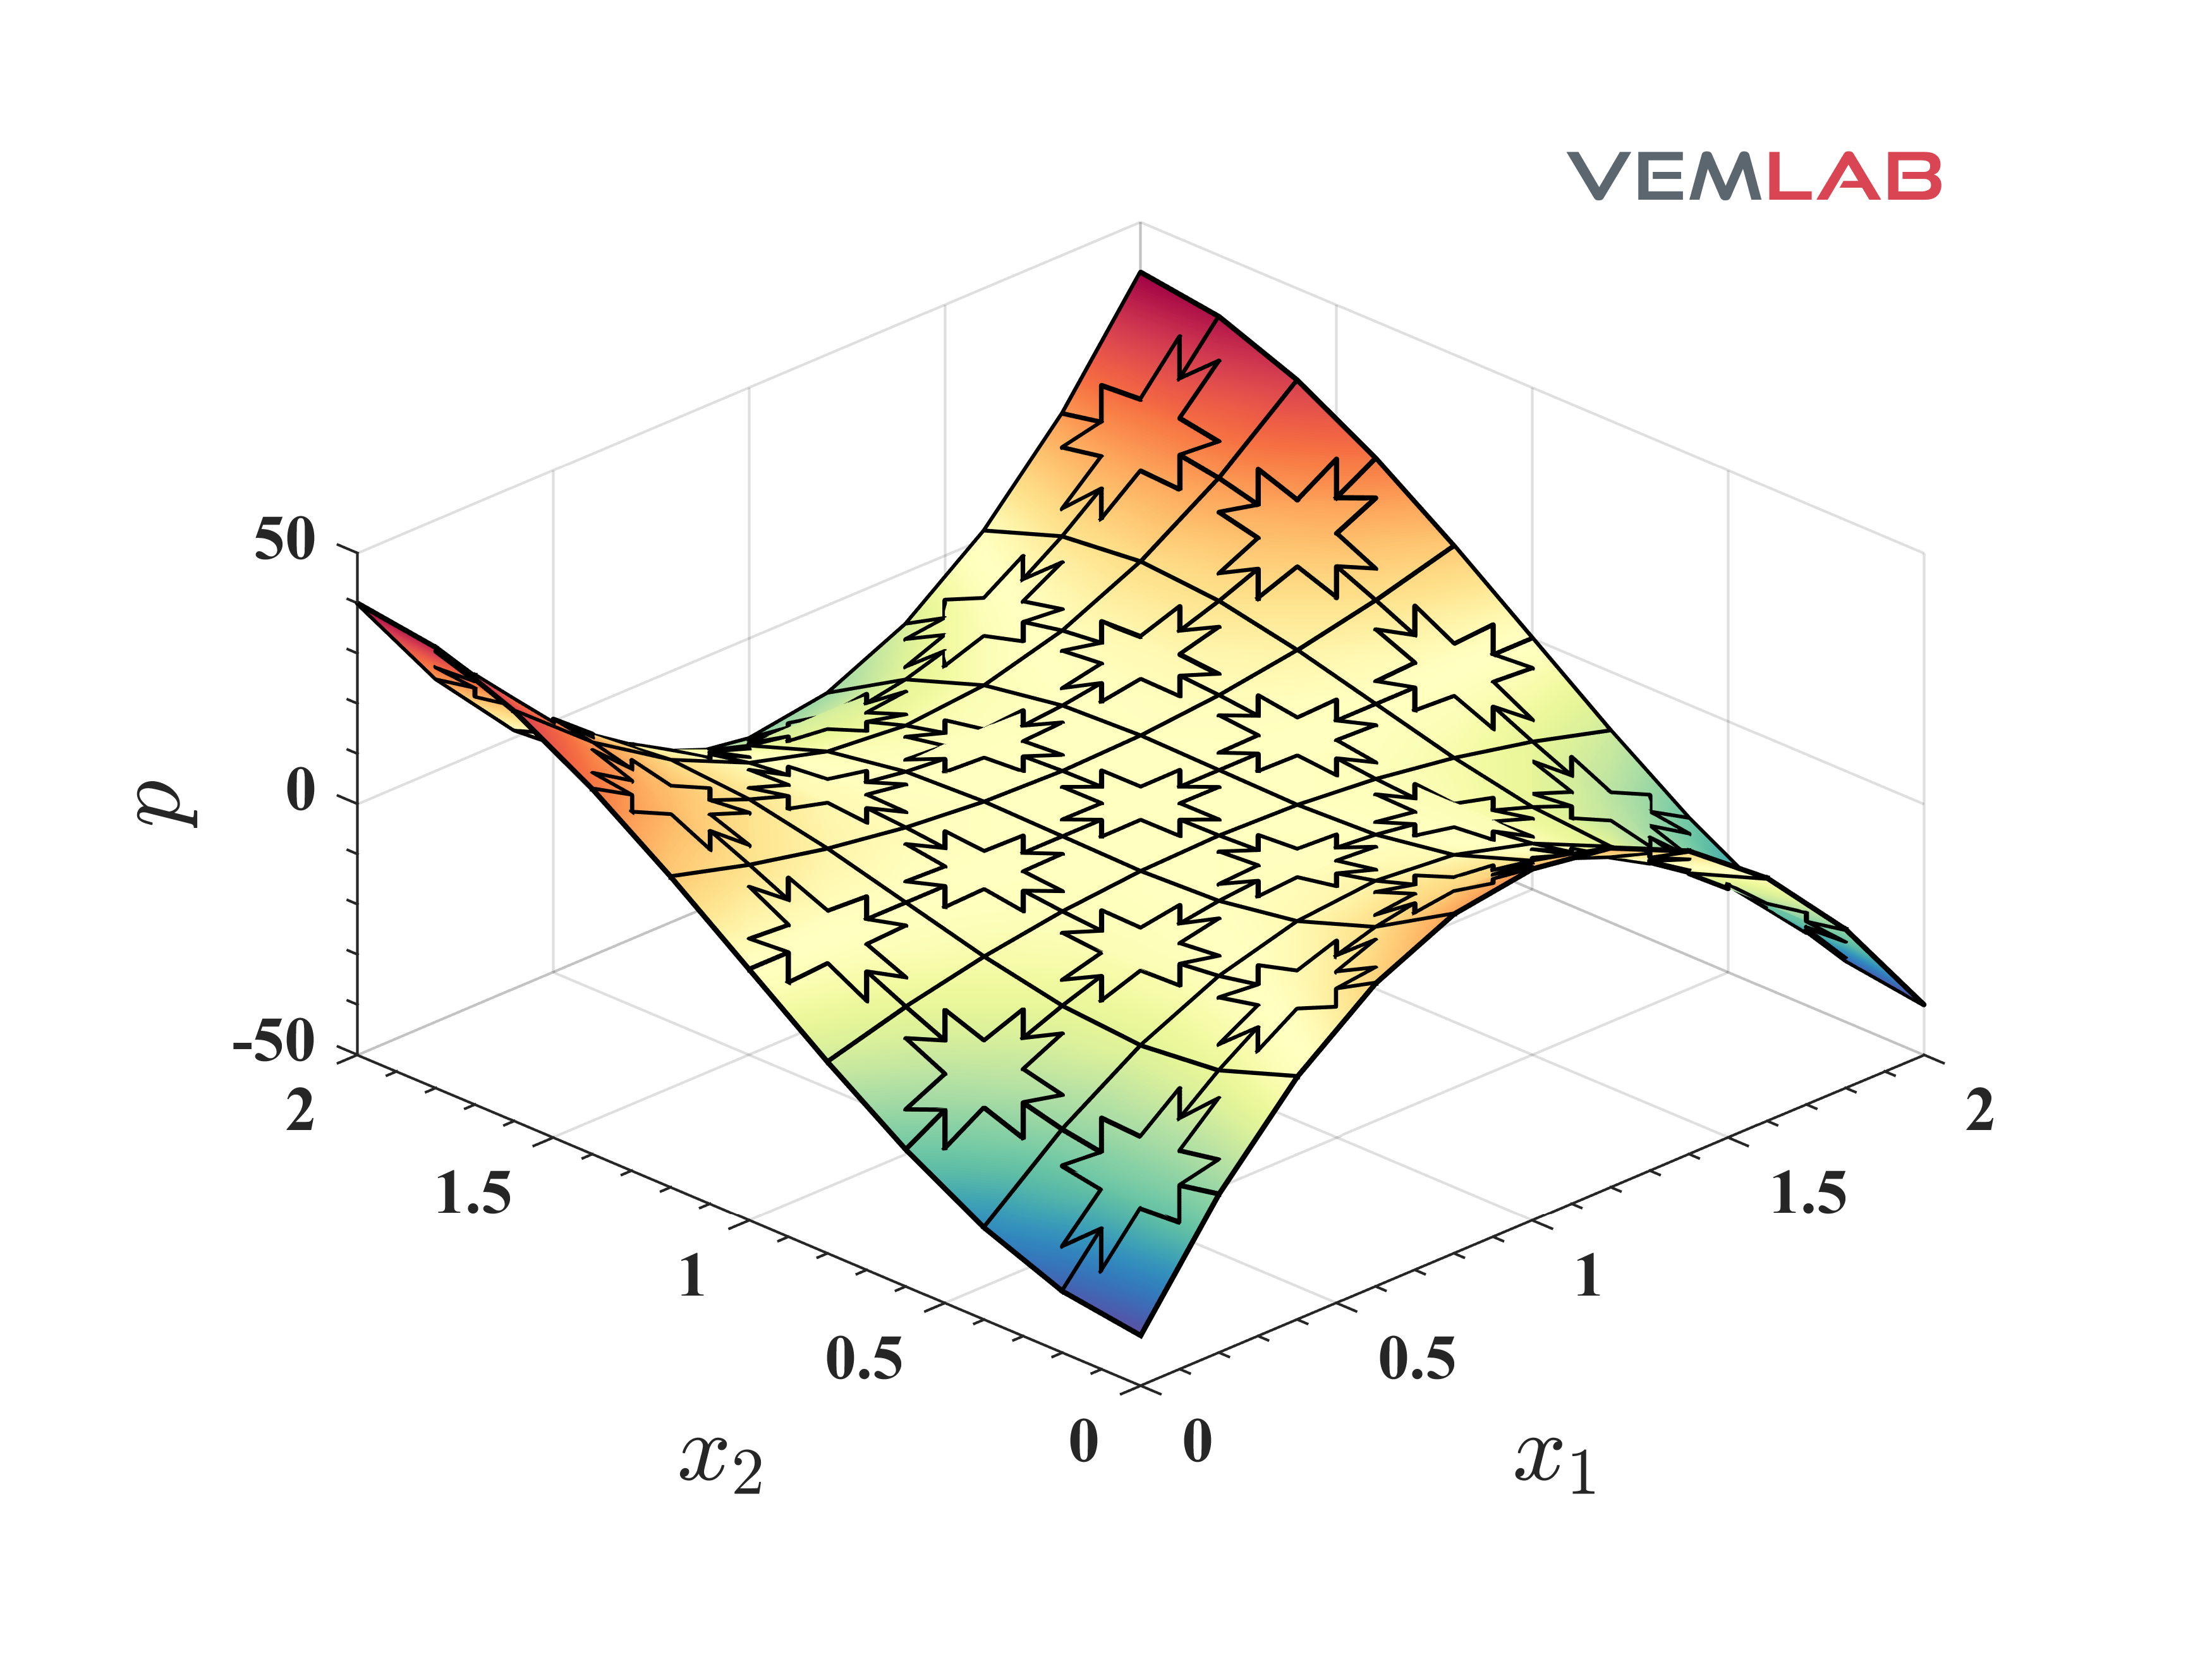 Release of VEMLAB 2.4